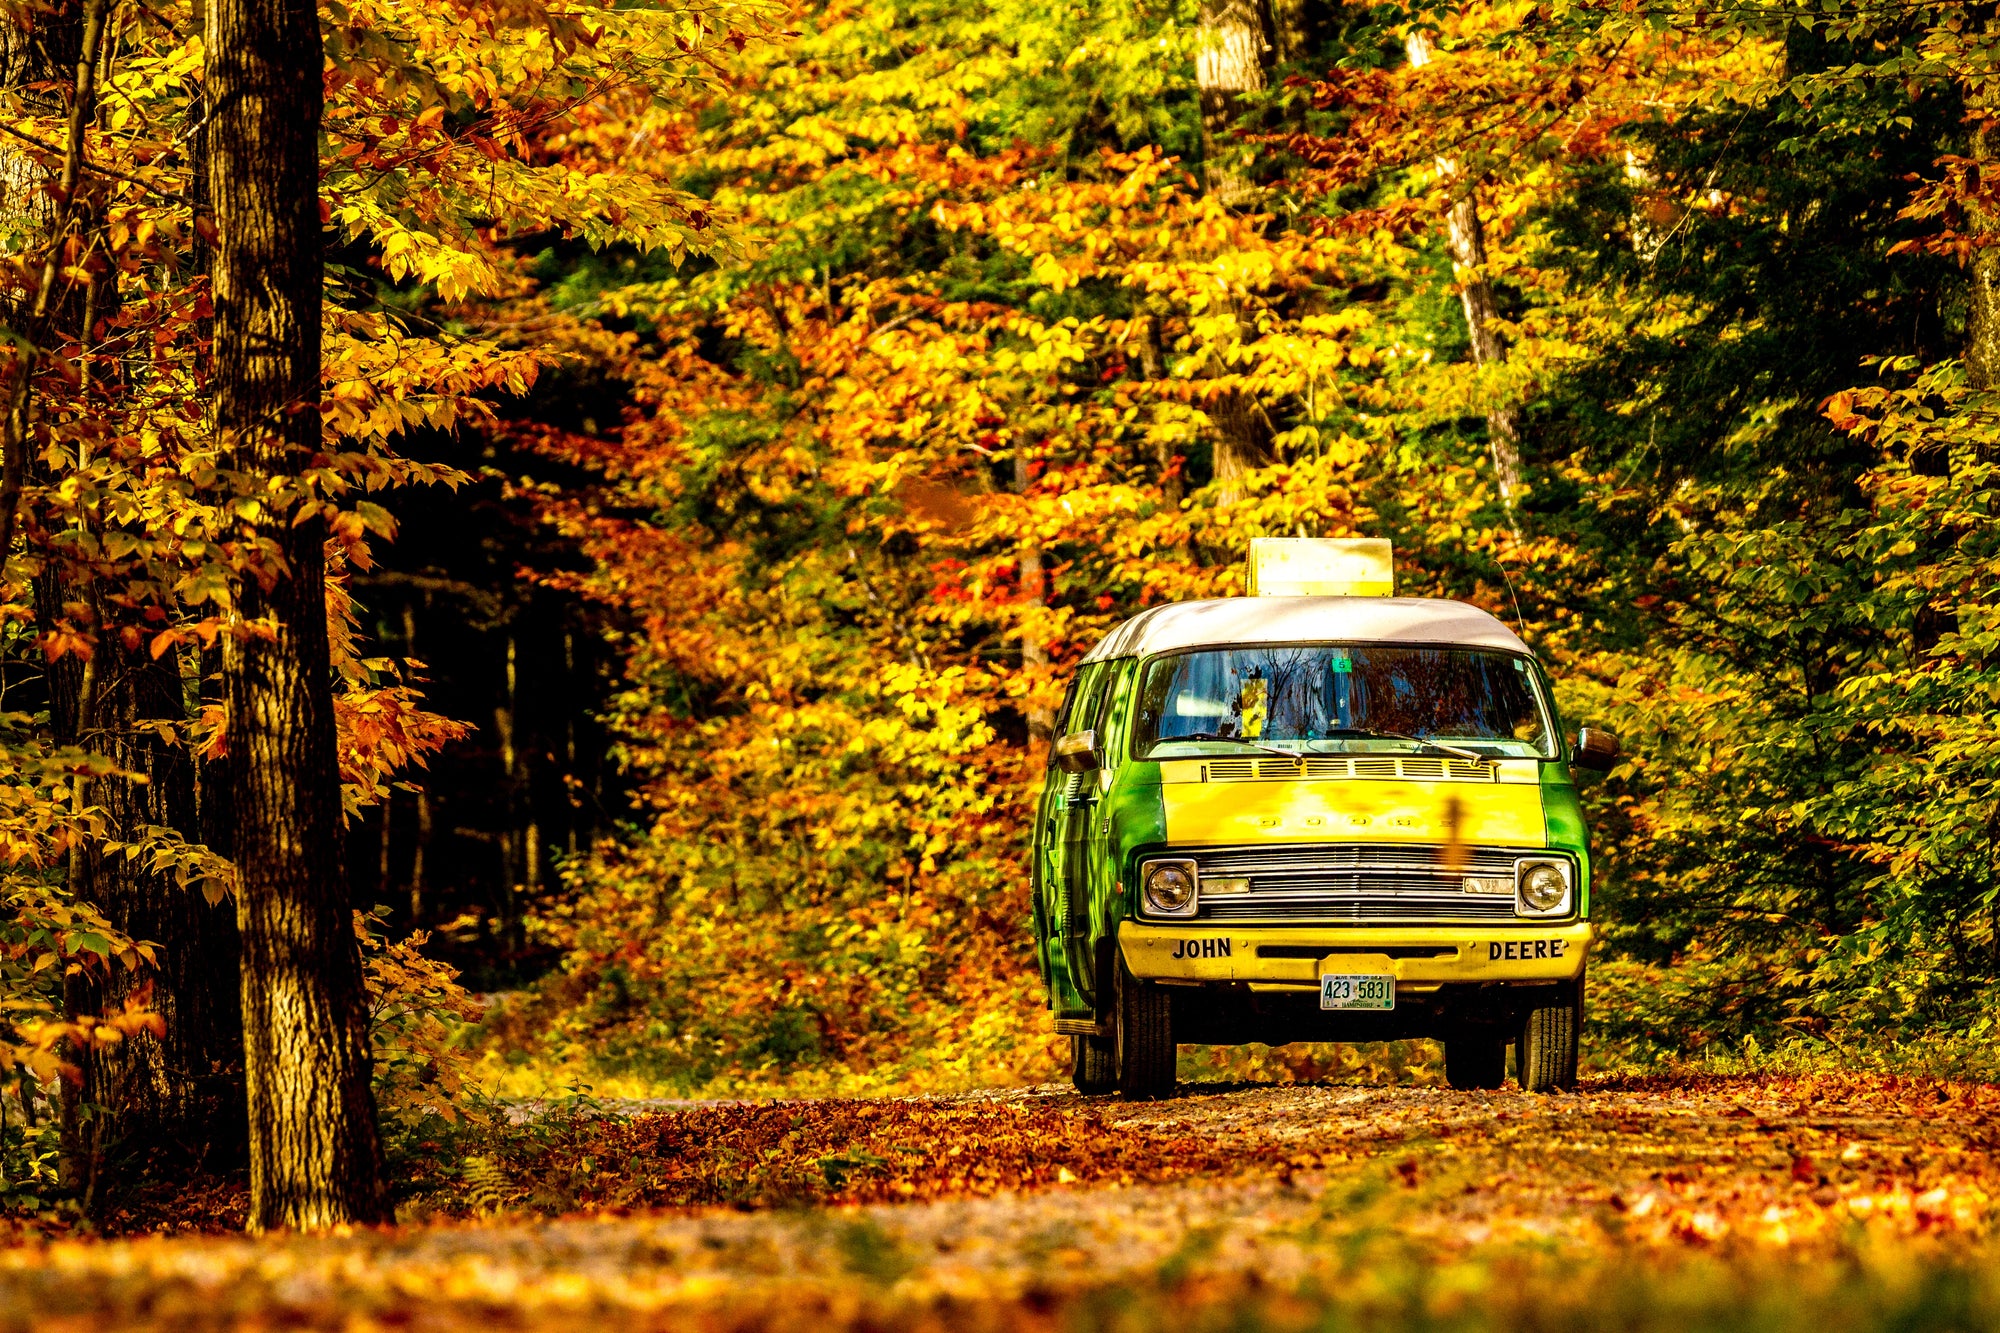 A Colorful Journey: Itineraries and Tips for Planning the Perfect Autumn Road Trip